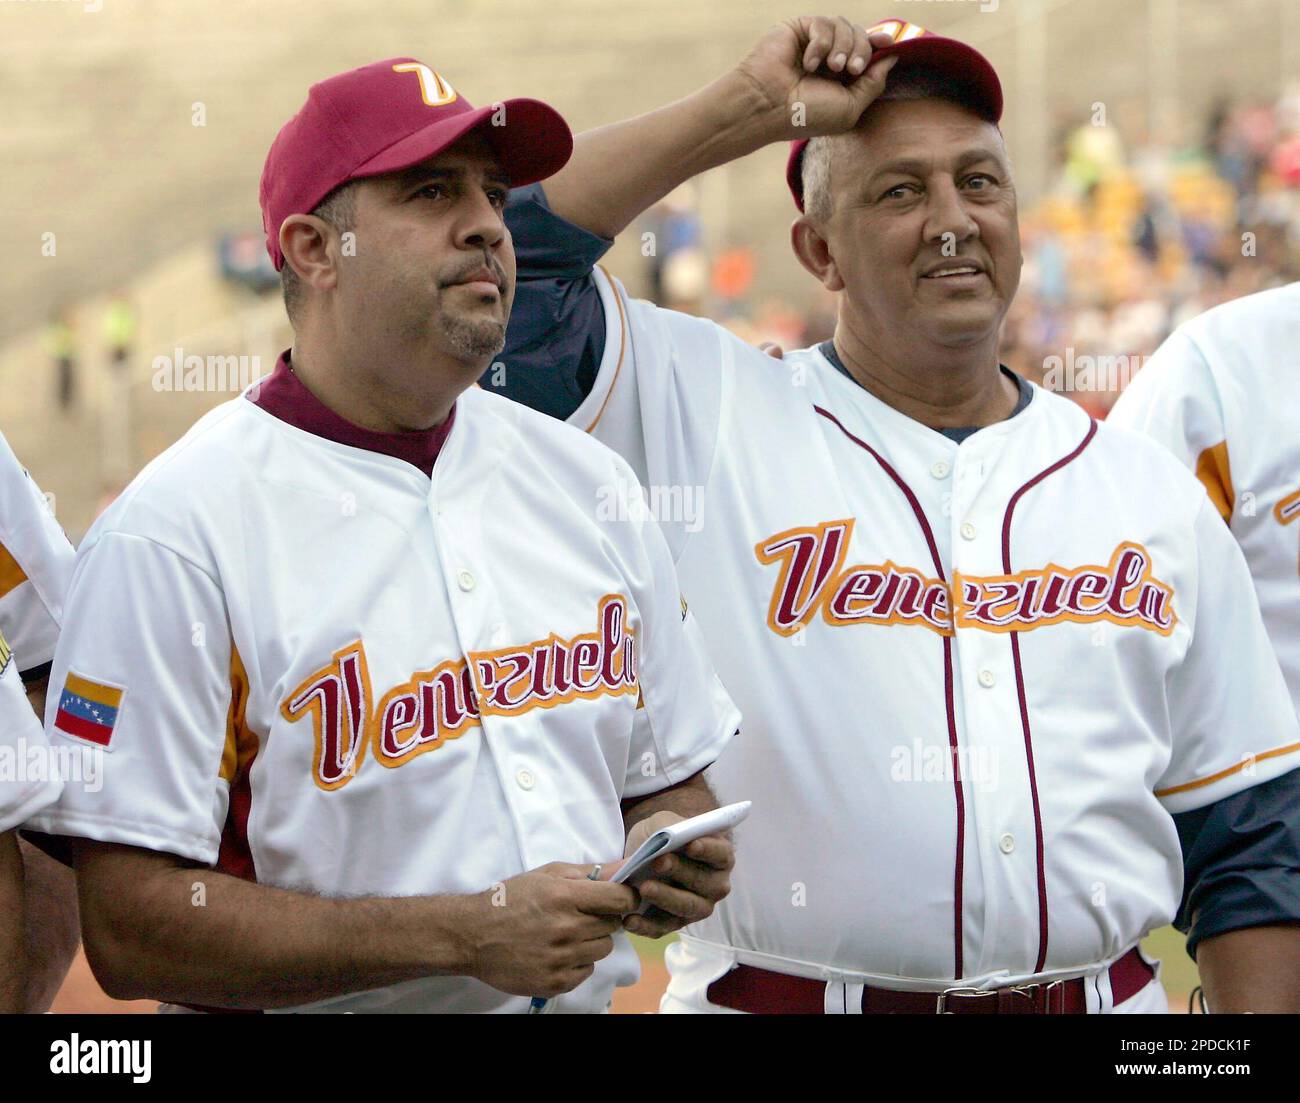 Venezuela's manager Luis Sojo, left, and bench coach David Concepcion smile  during a practice session of the Venezuelan Baseball National team at the  University stadium in Caracas, Venezuela, Saturday, Feb. 11, 2006.